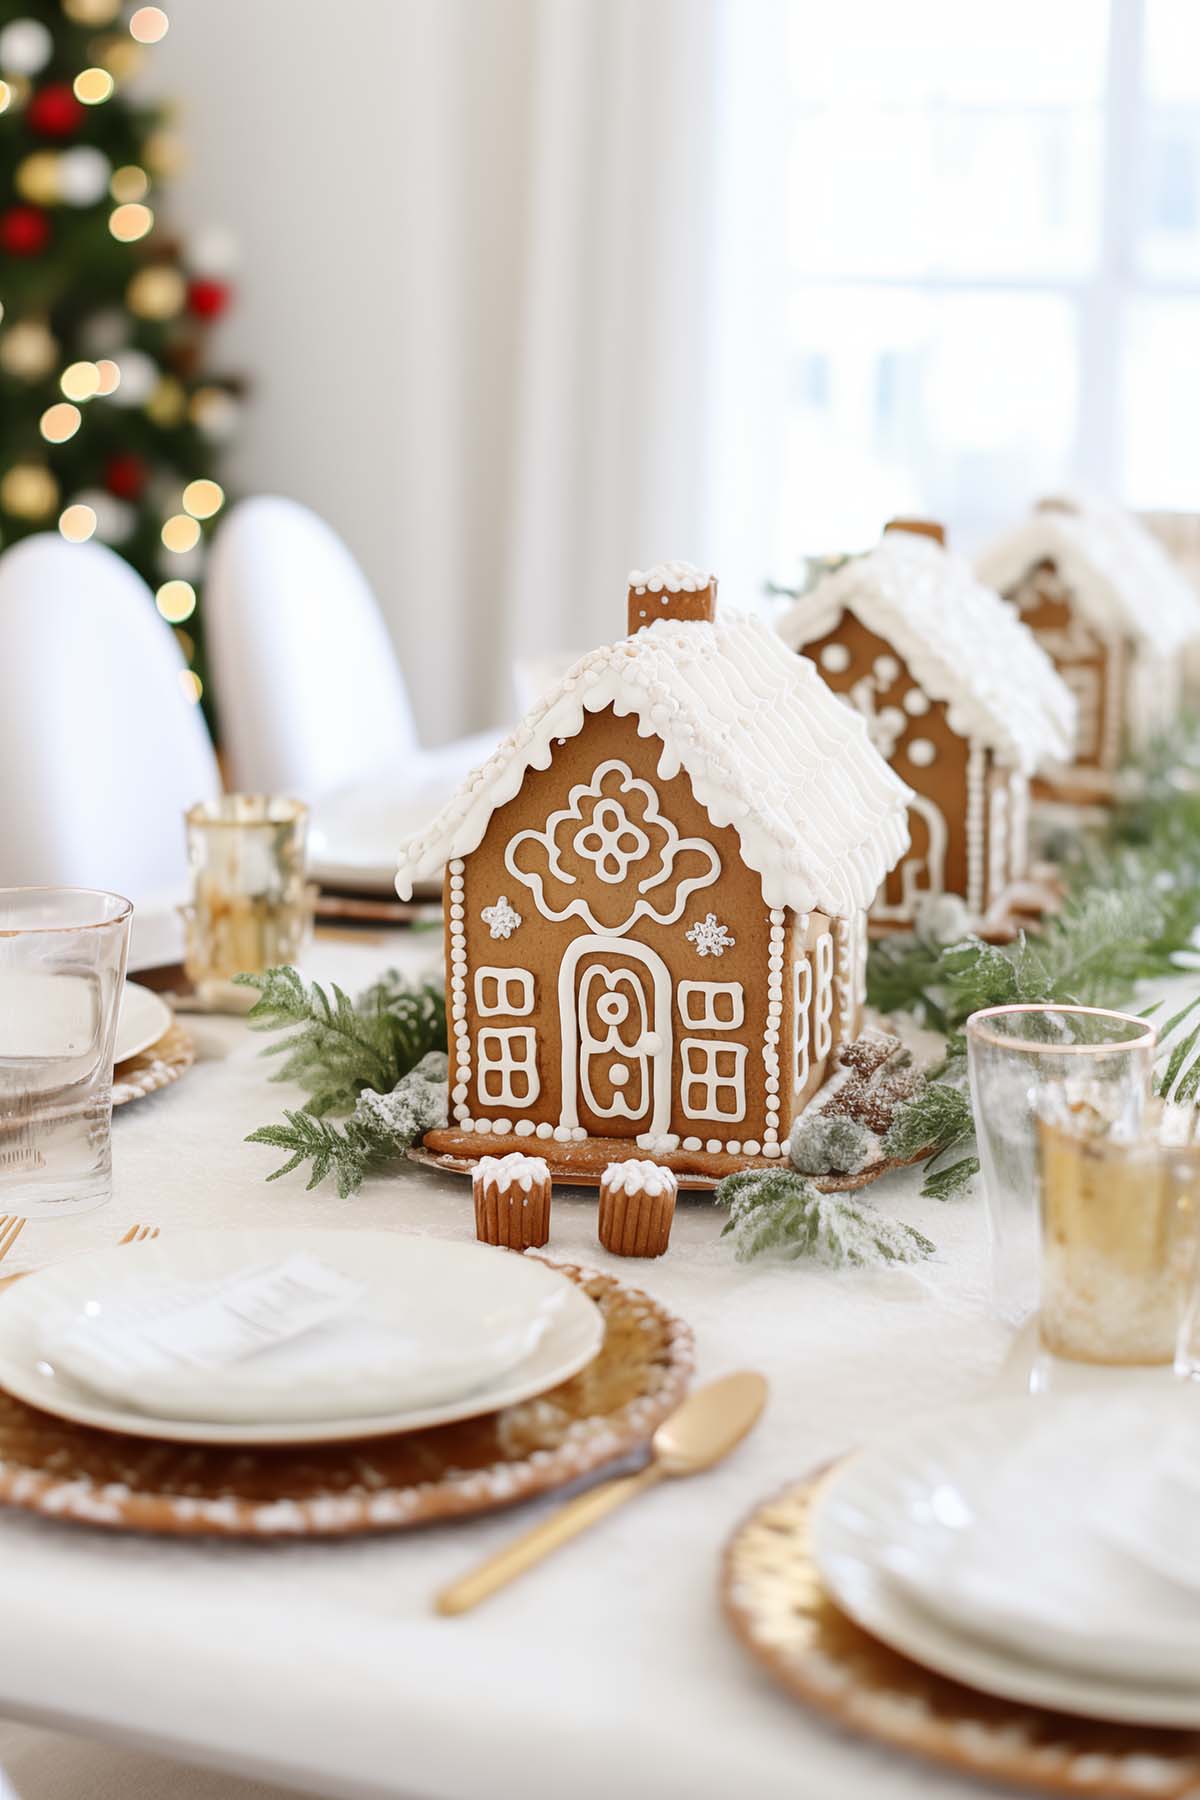 Gingerbread house decorated with white frosting on a tablescape with frosted greenery and white and gold elements.